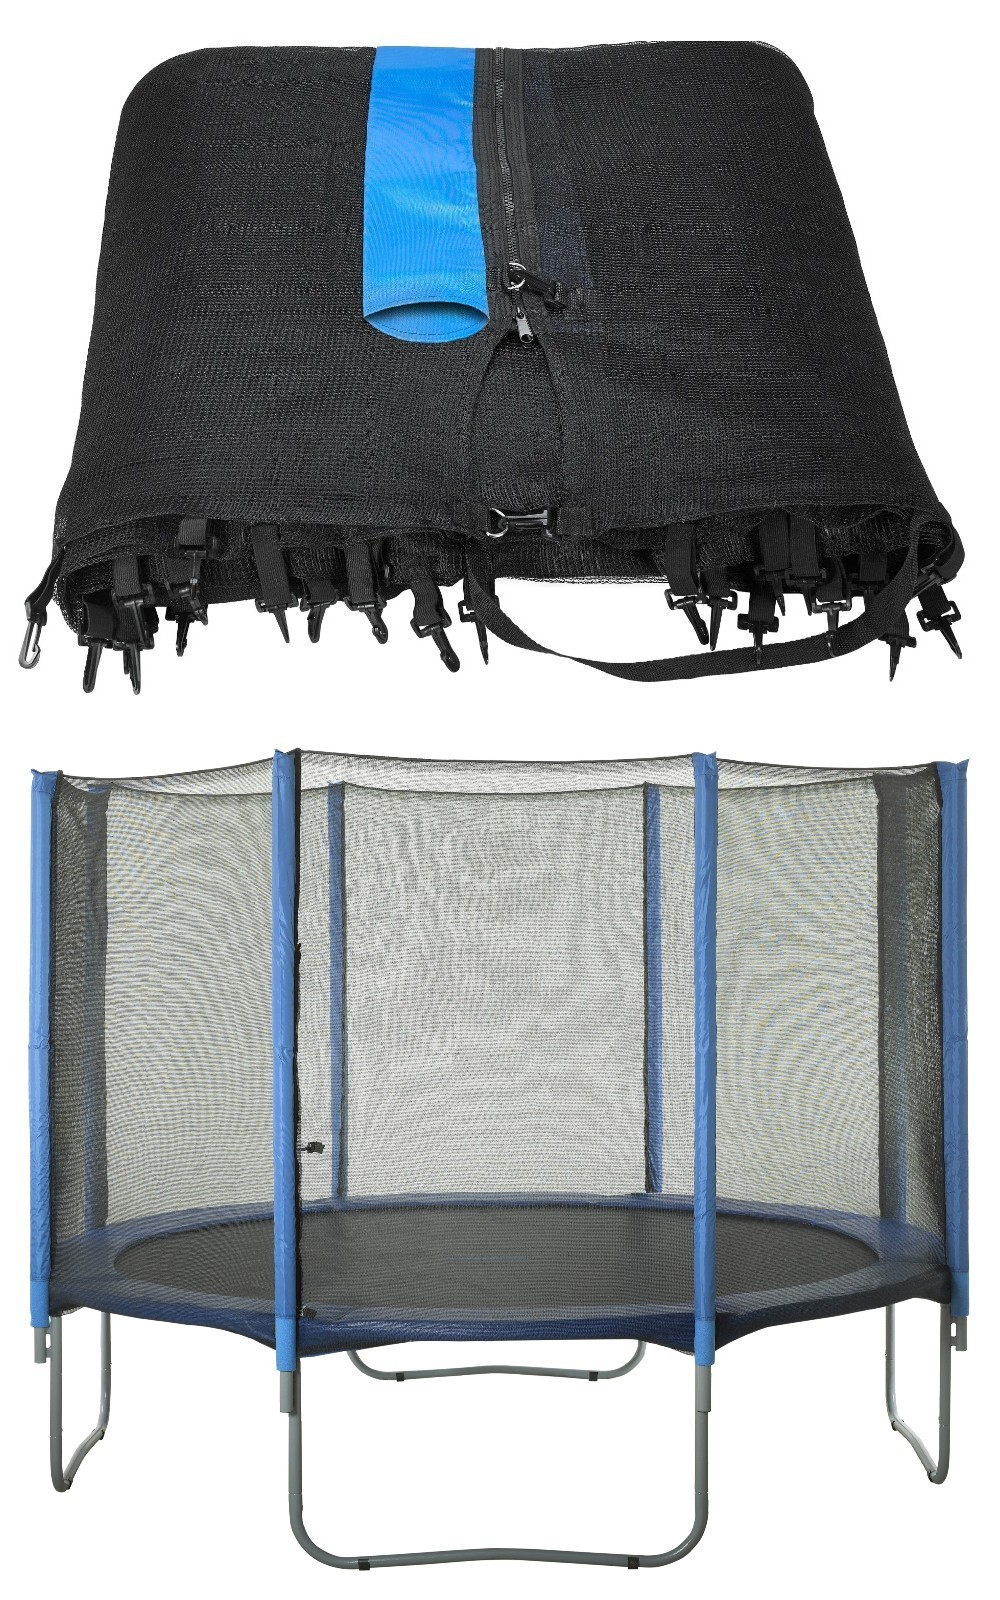 Trampoline Replacement Enclosure Safety Net, fits for 14 FT. Round Frames using 8 Straight Poles - Net Only